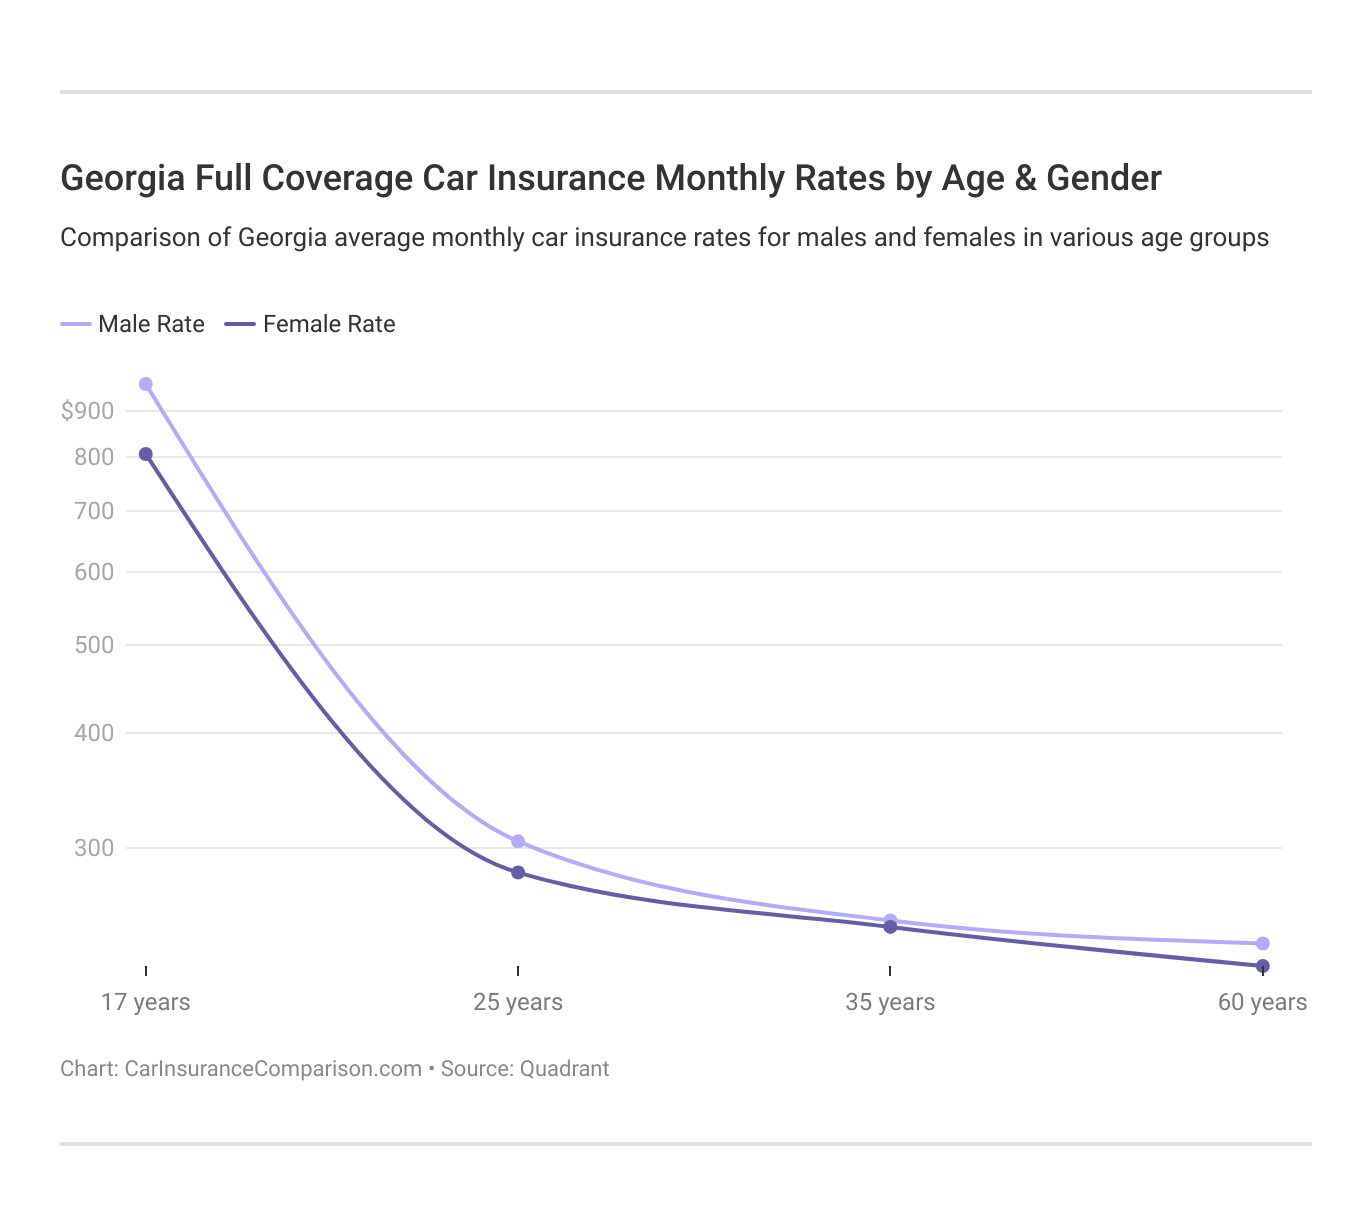 <h3>Georgia Full Coverage Car Insurance Monthly Rates by Age & Gender</h3>